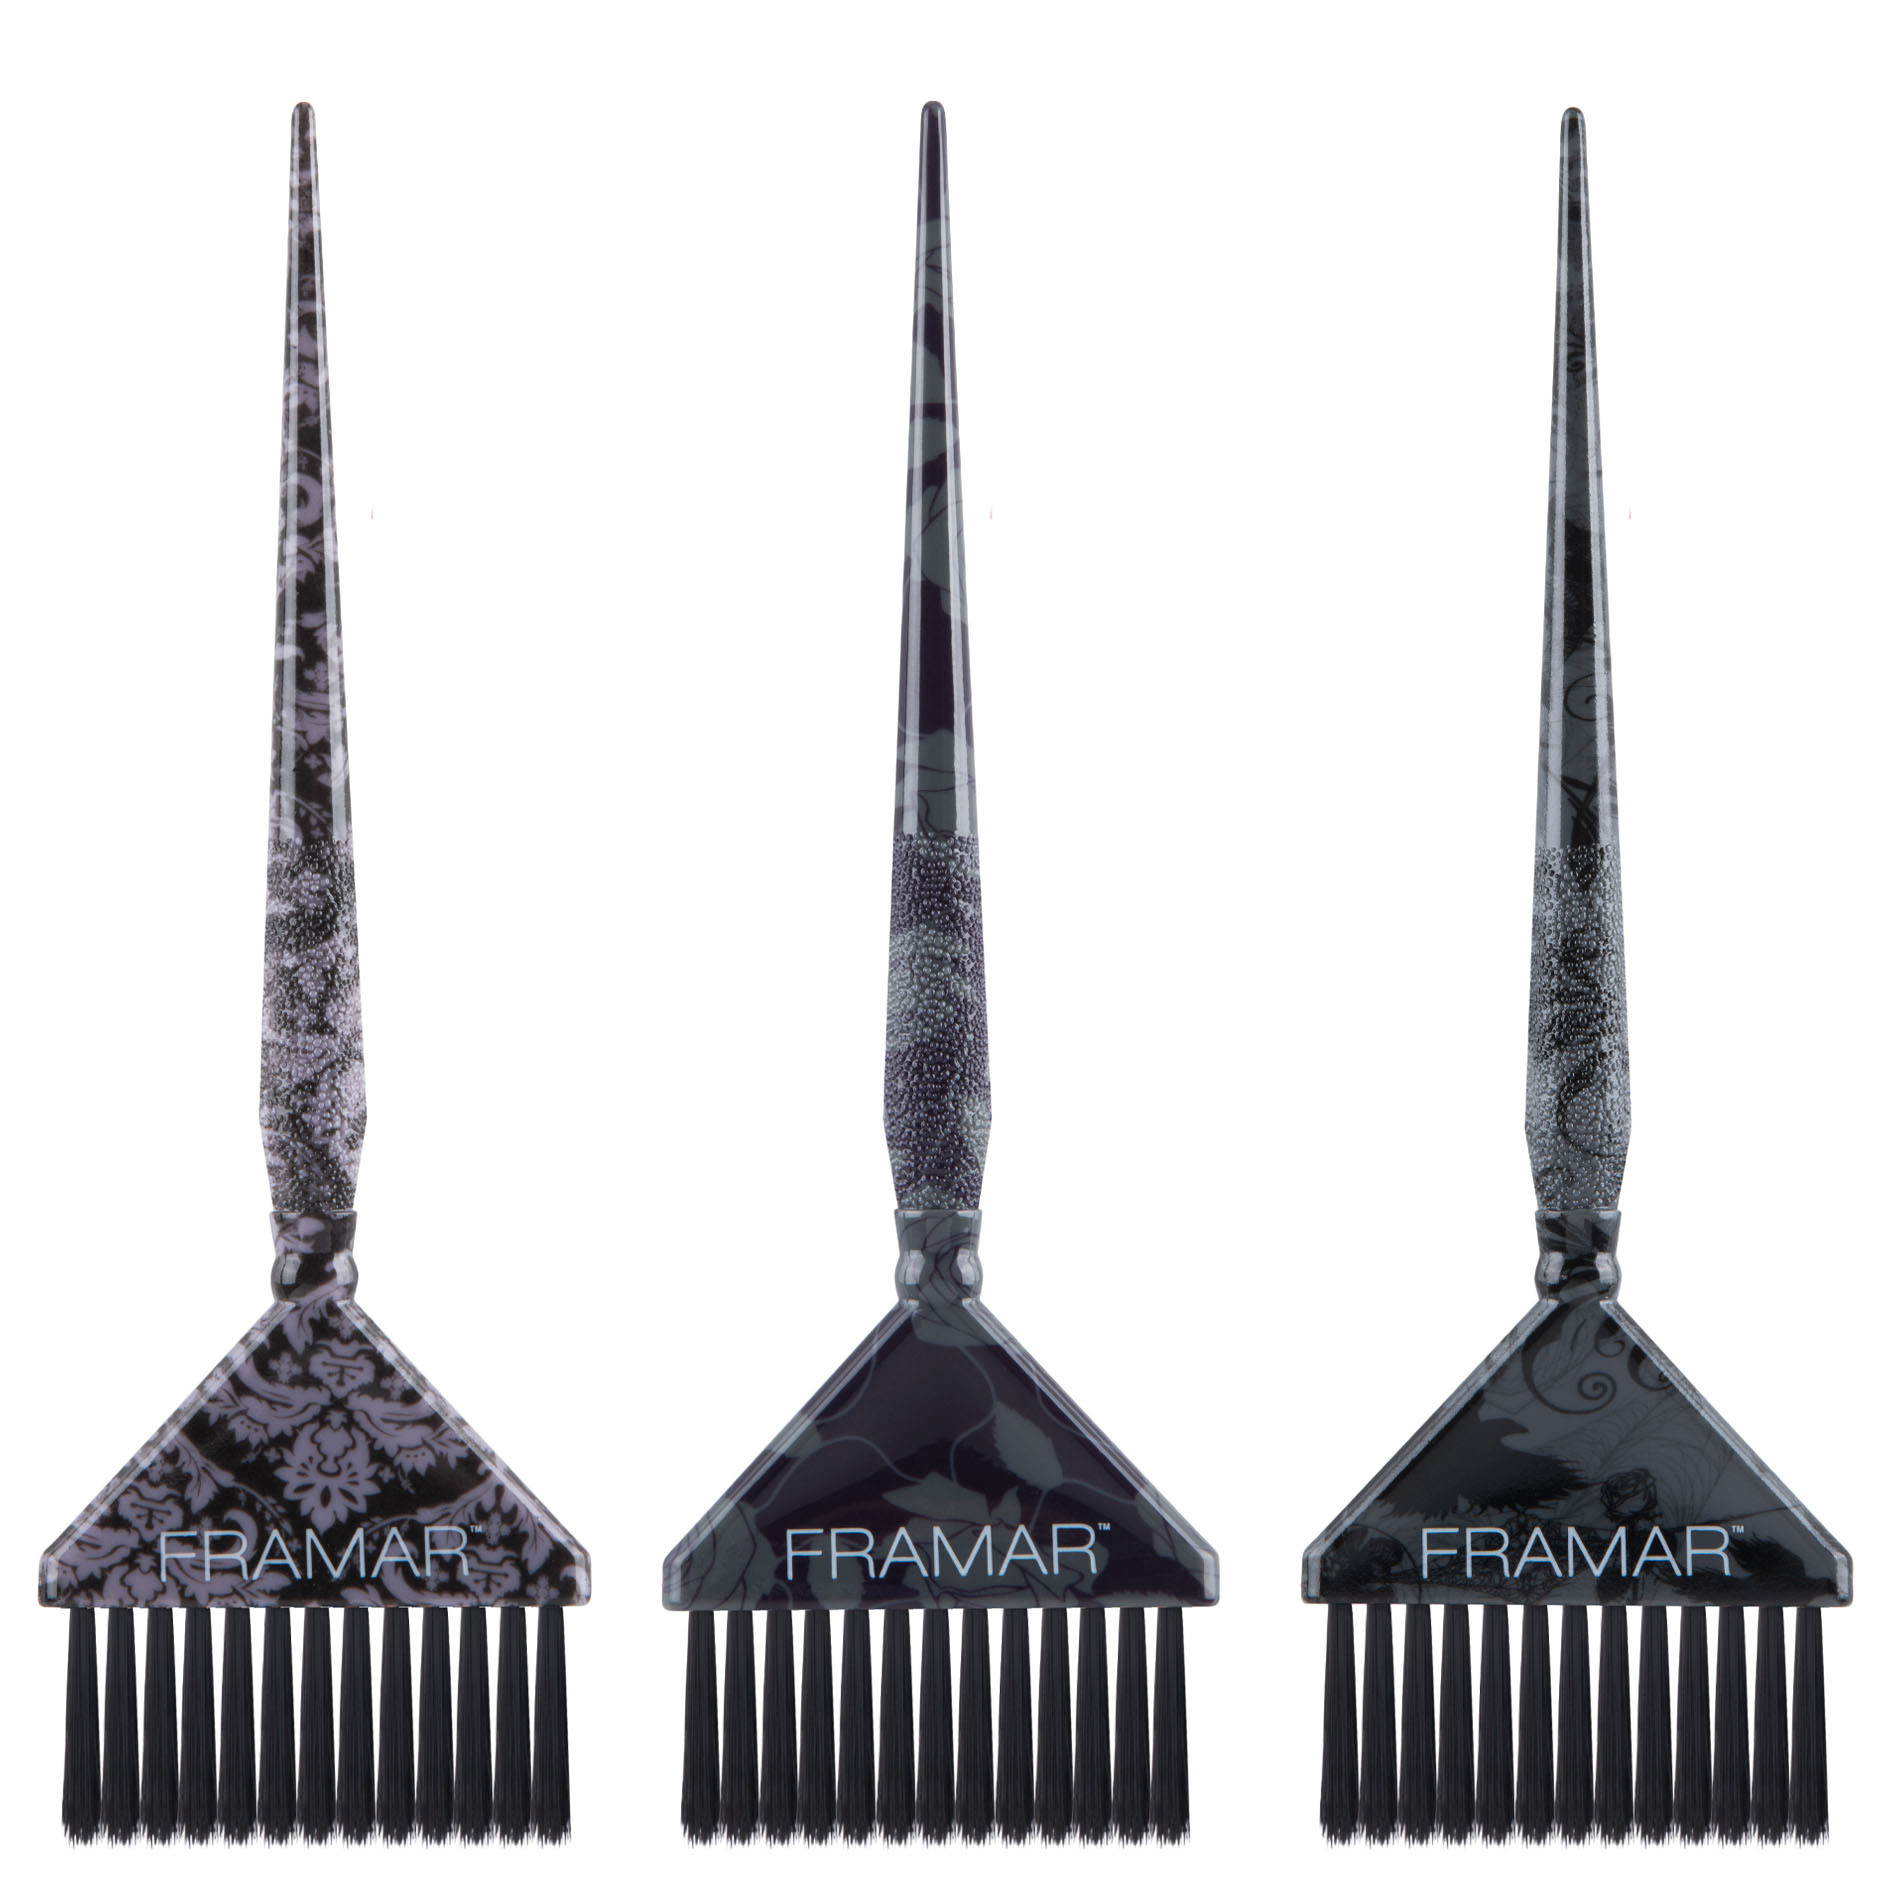 Framar COLOR BRUSHES: Oh My Goth Big Daddy Color Brush Set